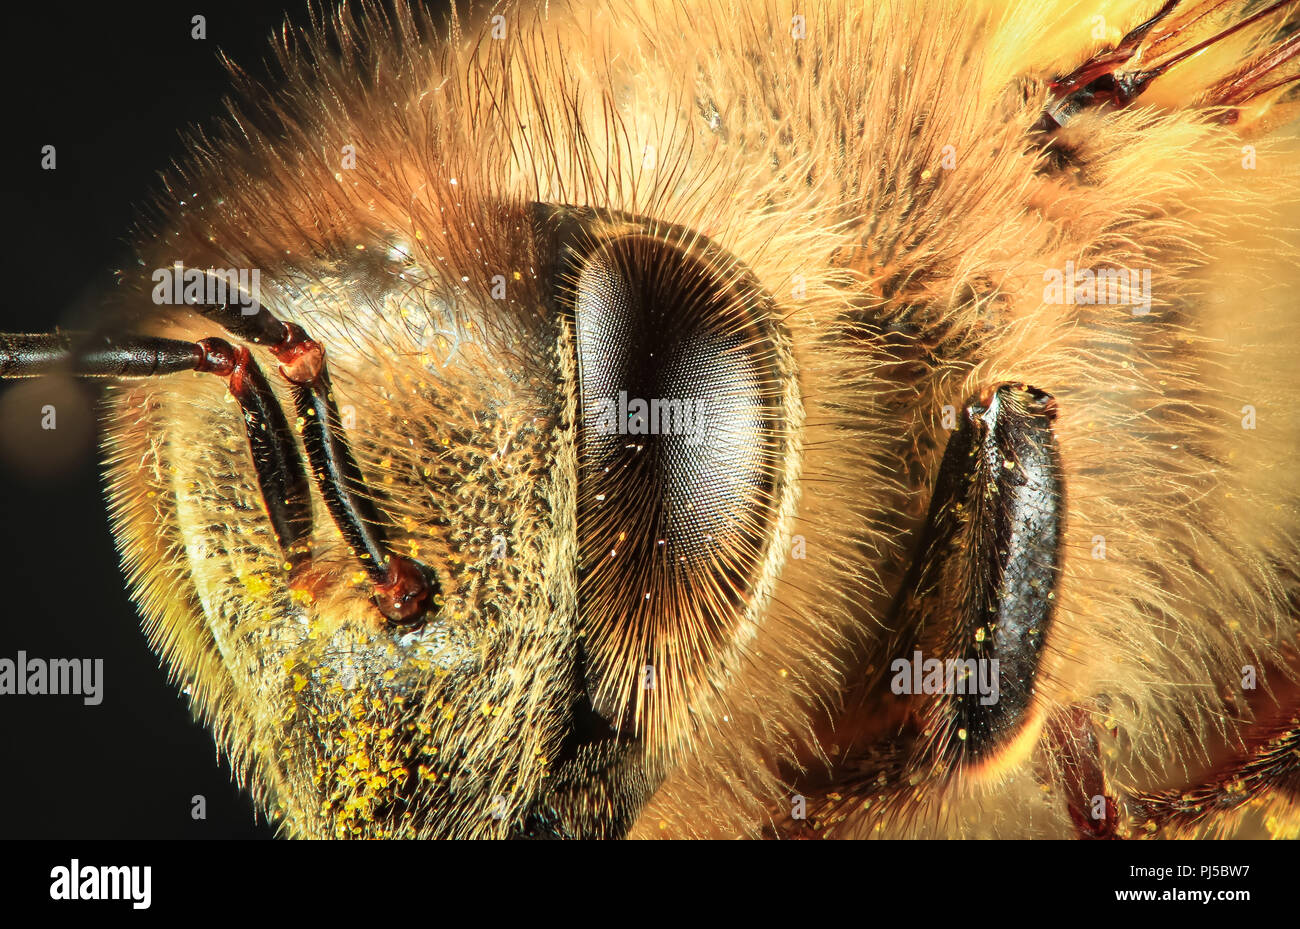 Closeup of the eye and face of a western honey bee (Apis mellifera). Stock Photo